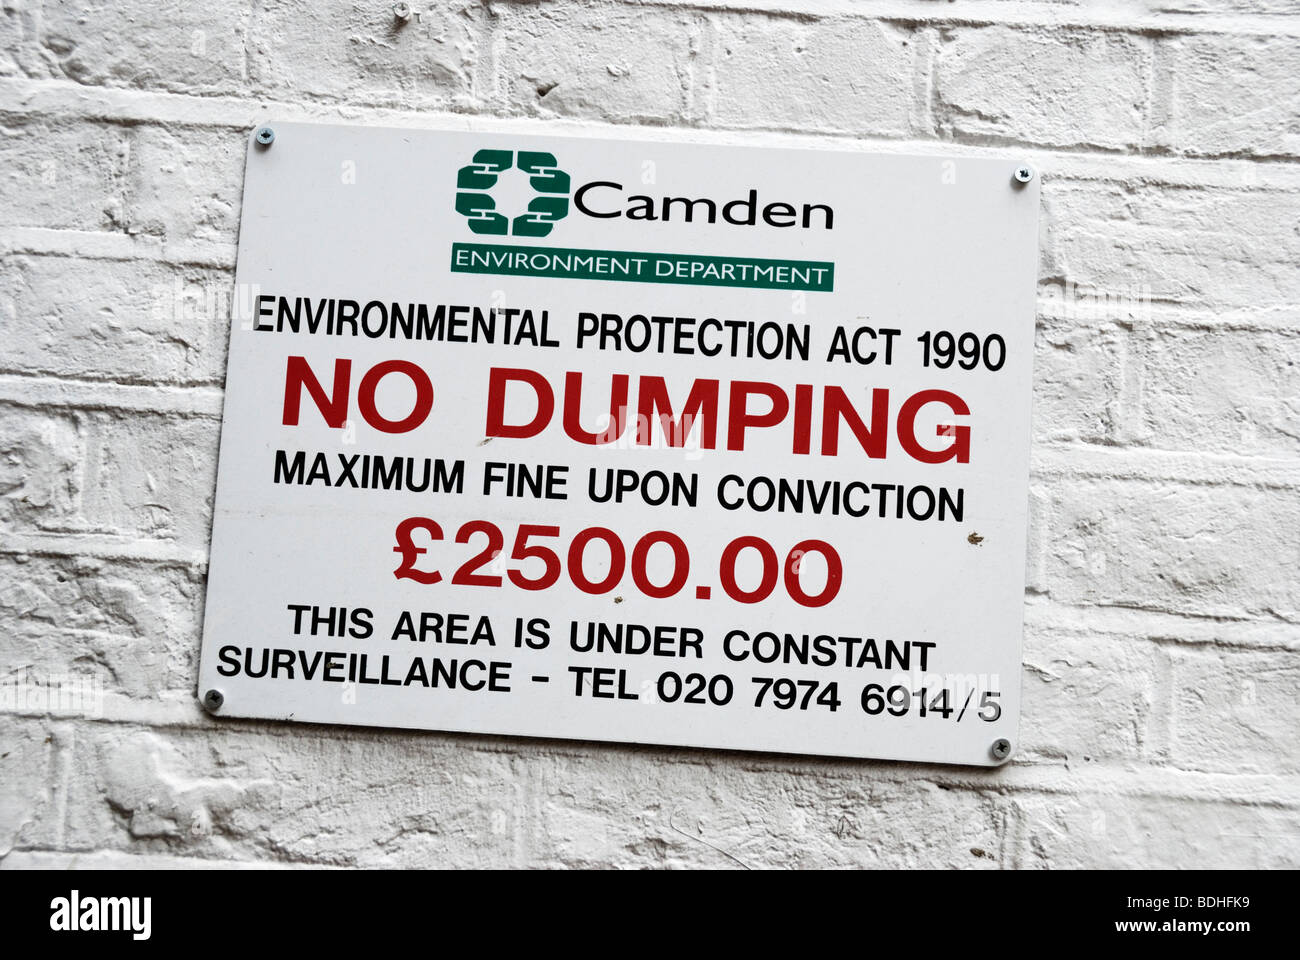 KEIN DUMPING Environmental Protection Act 1990 Mitteilung an Wand im Stadtteil Camden in London Stockfoto